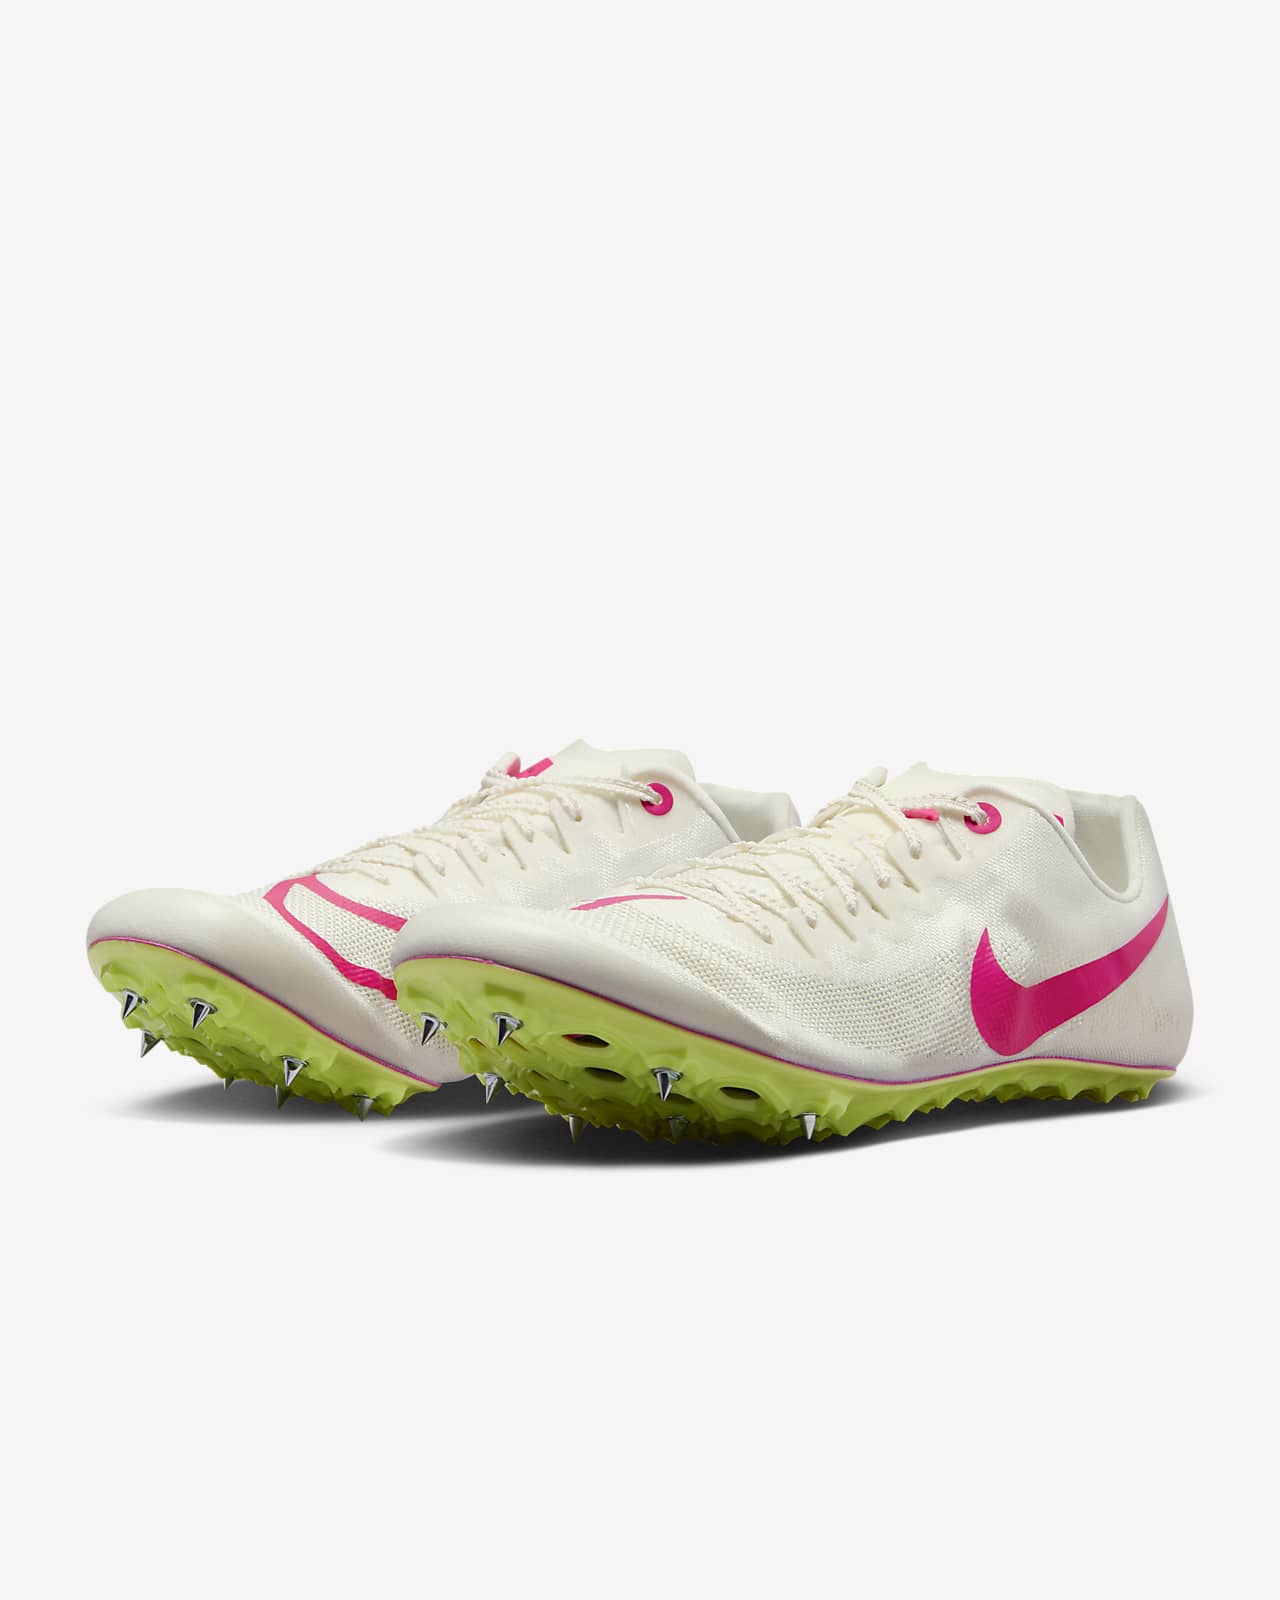 Nike Ja Fly 4 Track and Field Sprinting Spikes